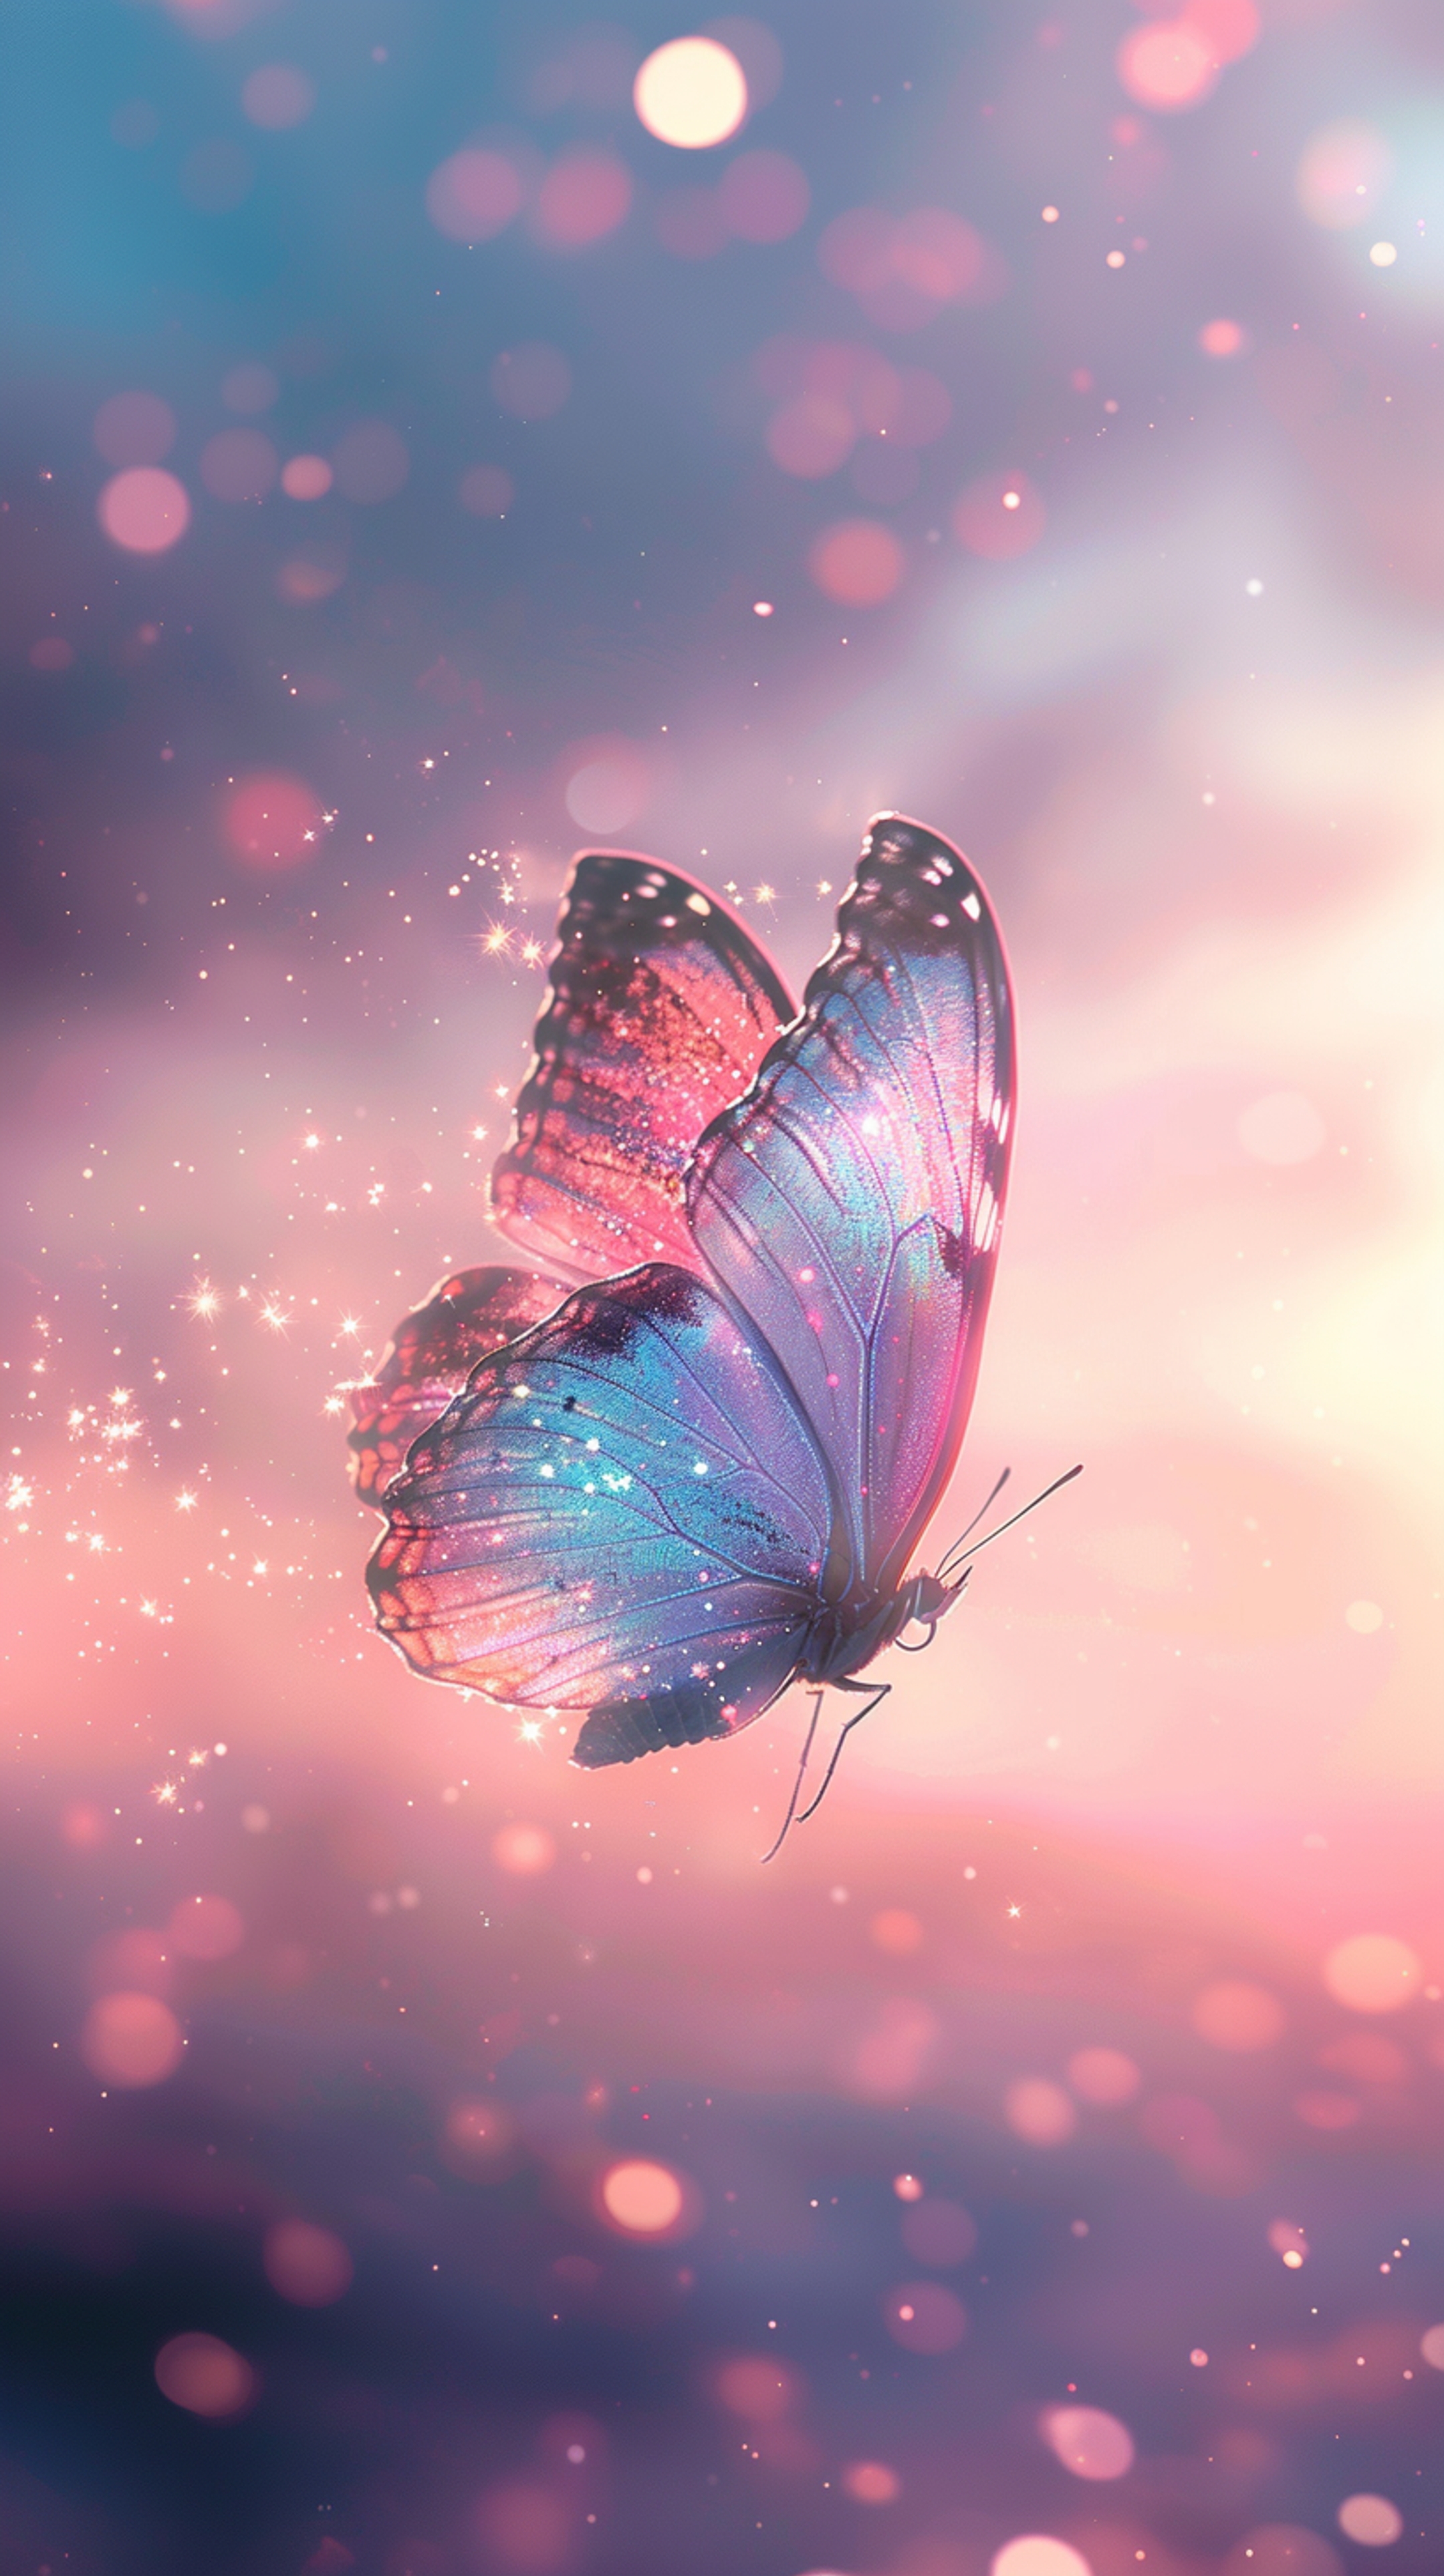 Magical Sparkling Butterfly in Dreamy Pink Sky Hintergrund[1278b2409cd84640a5d9]